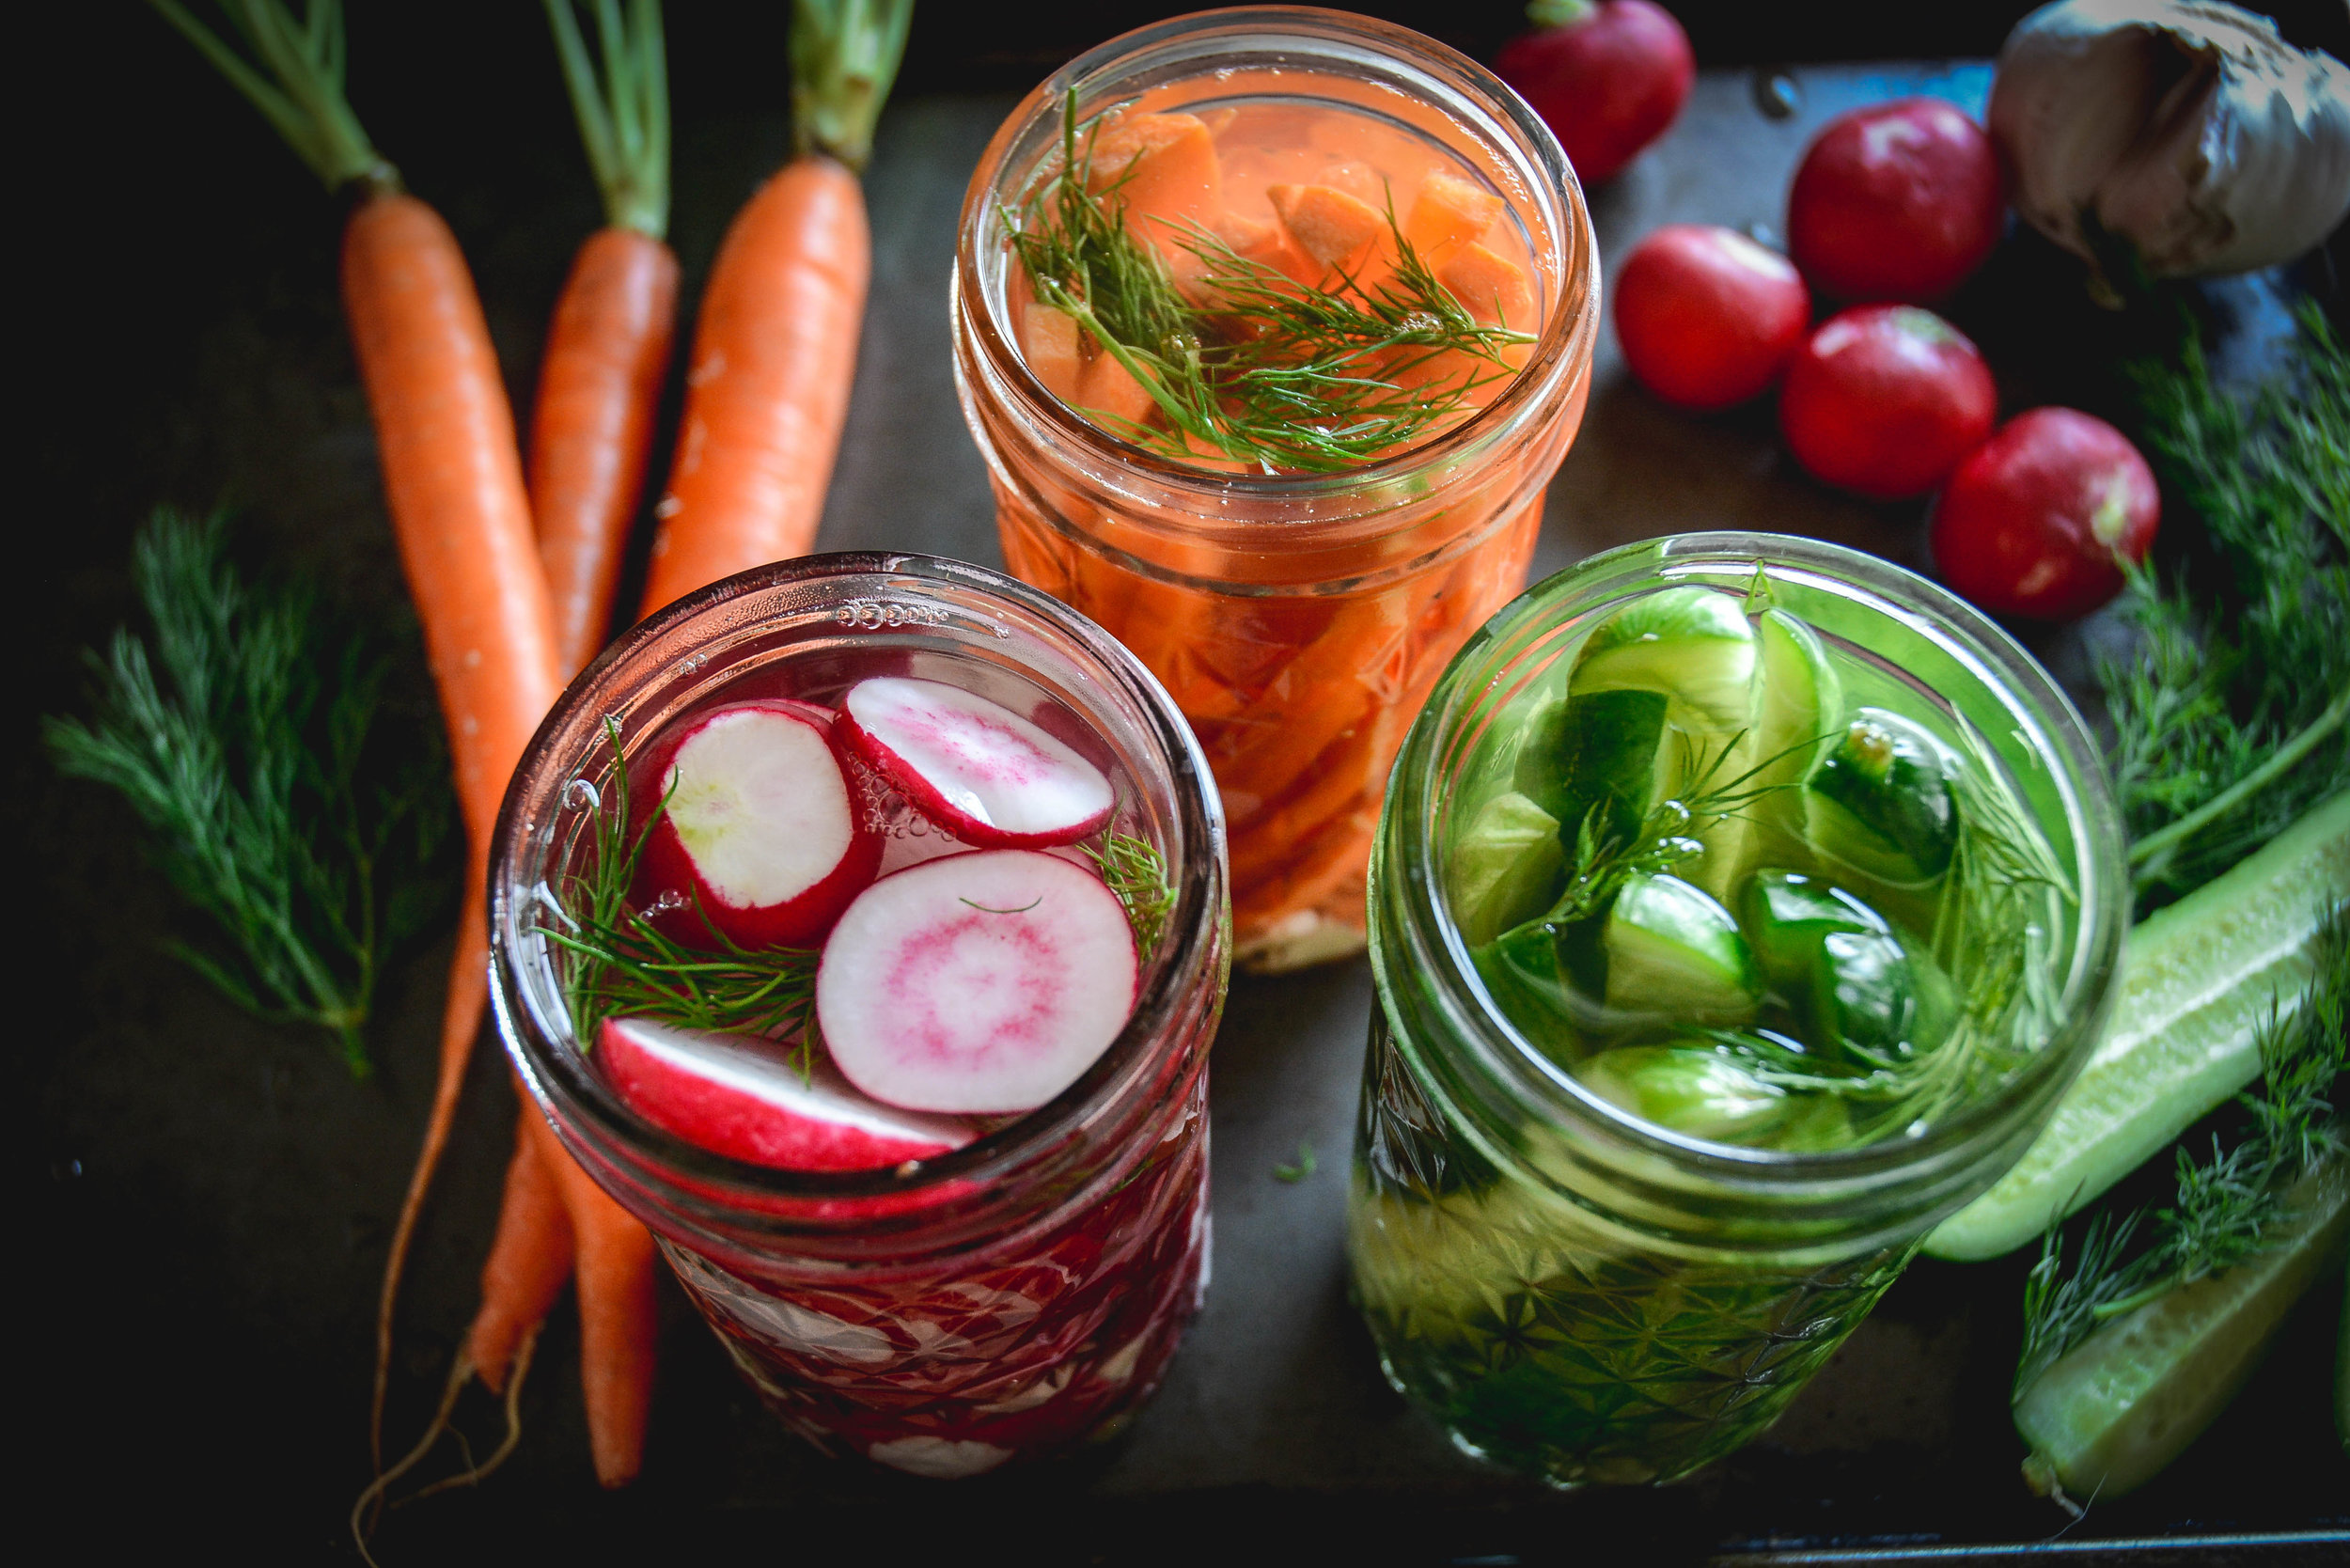  fermented pickles, carrots, and radishes 